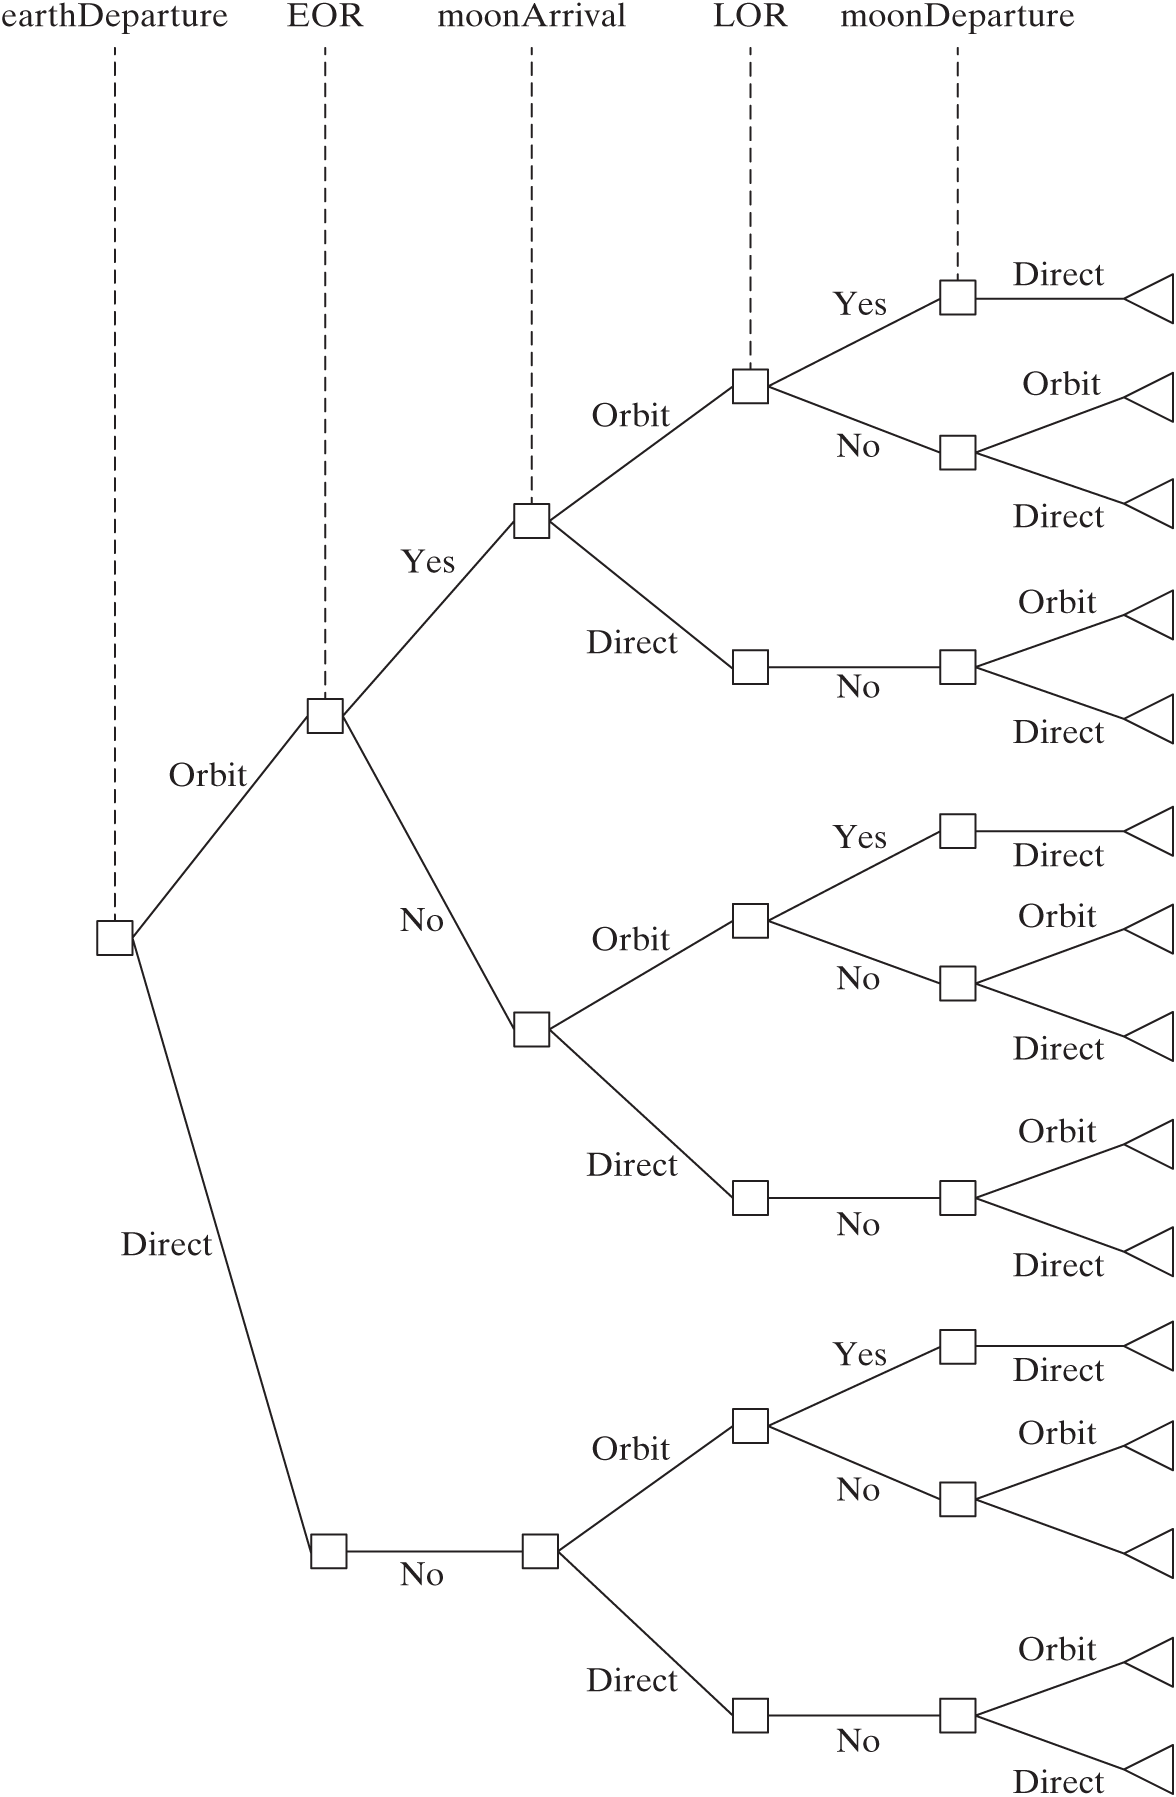 A decision tree shows the path that will be taken when various decisions of yes and no are made at each decision node.